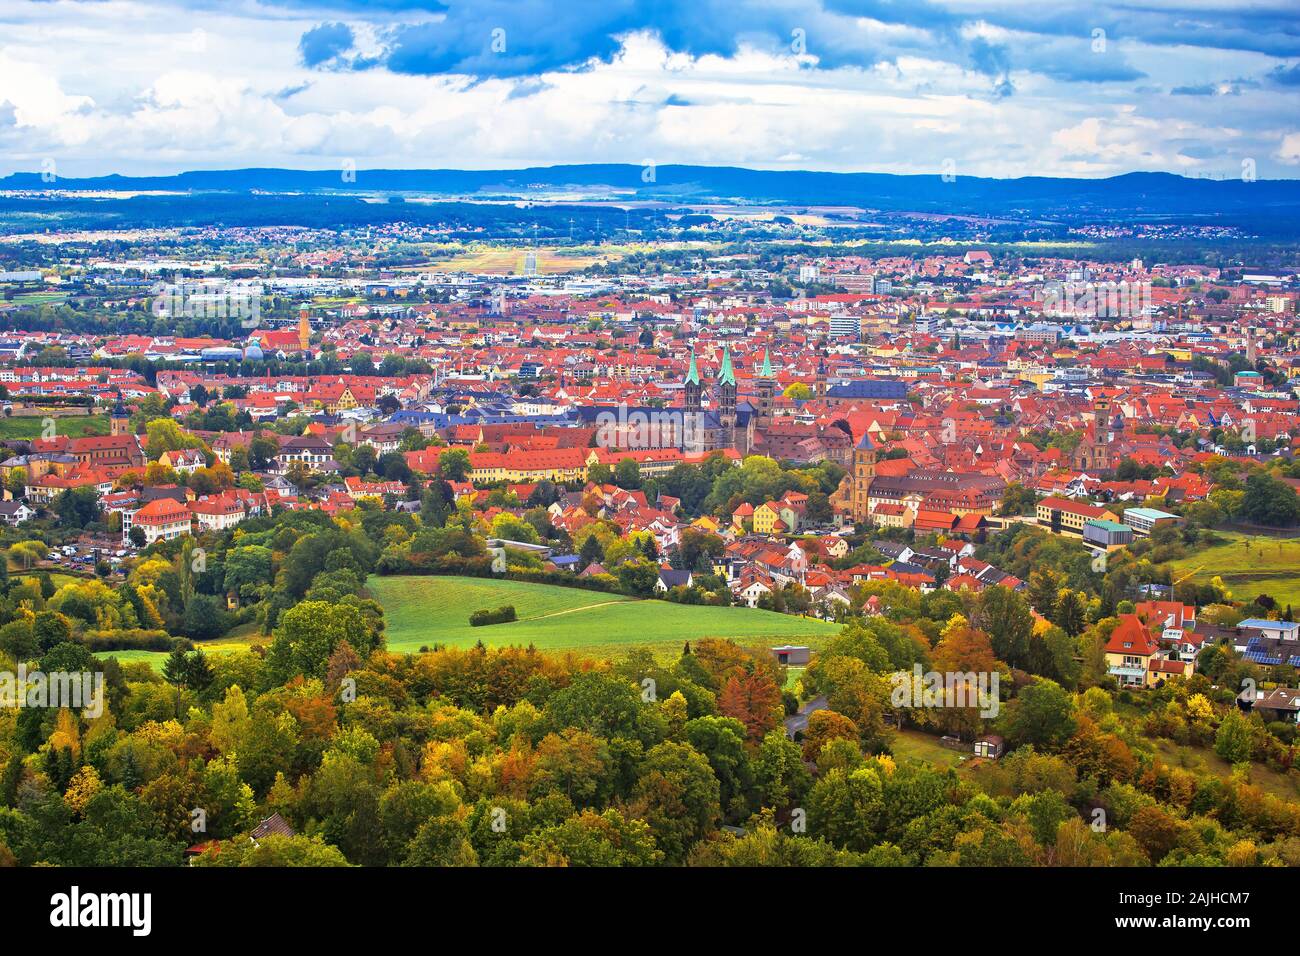 Bamberg. Aerial panoramic view of town of Bamberg, Upper Franconia, Bavaria region of Germany Stock Photo